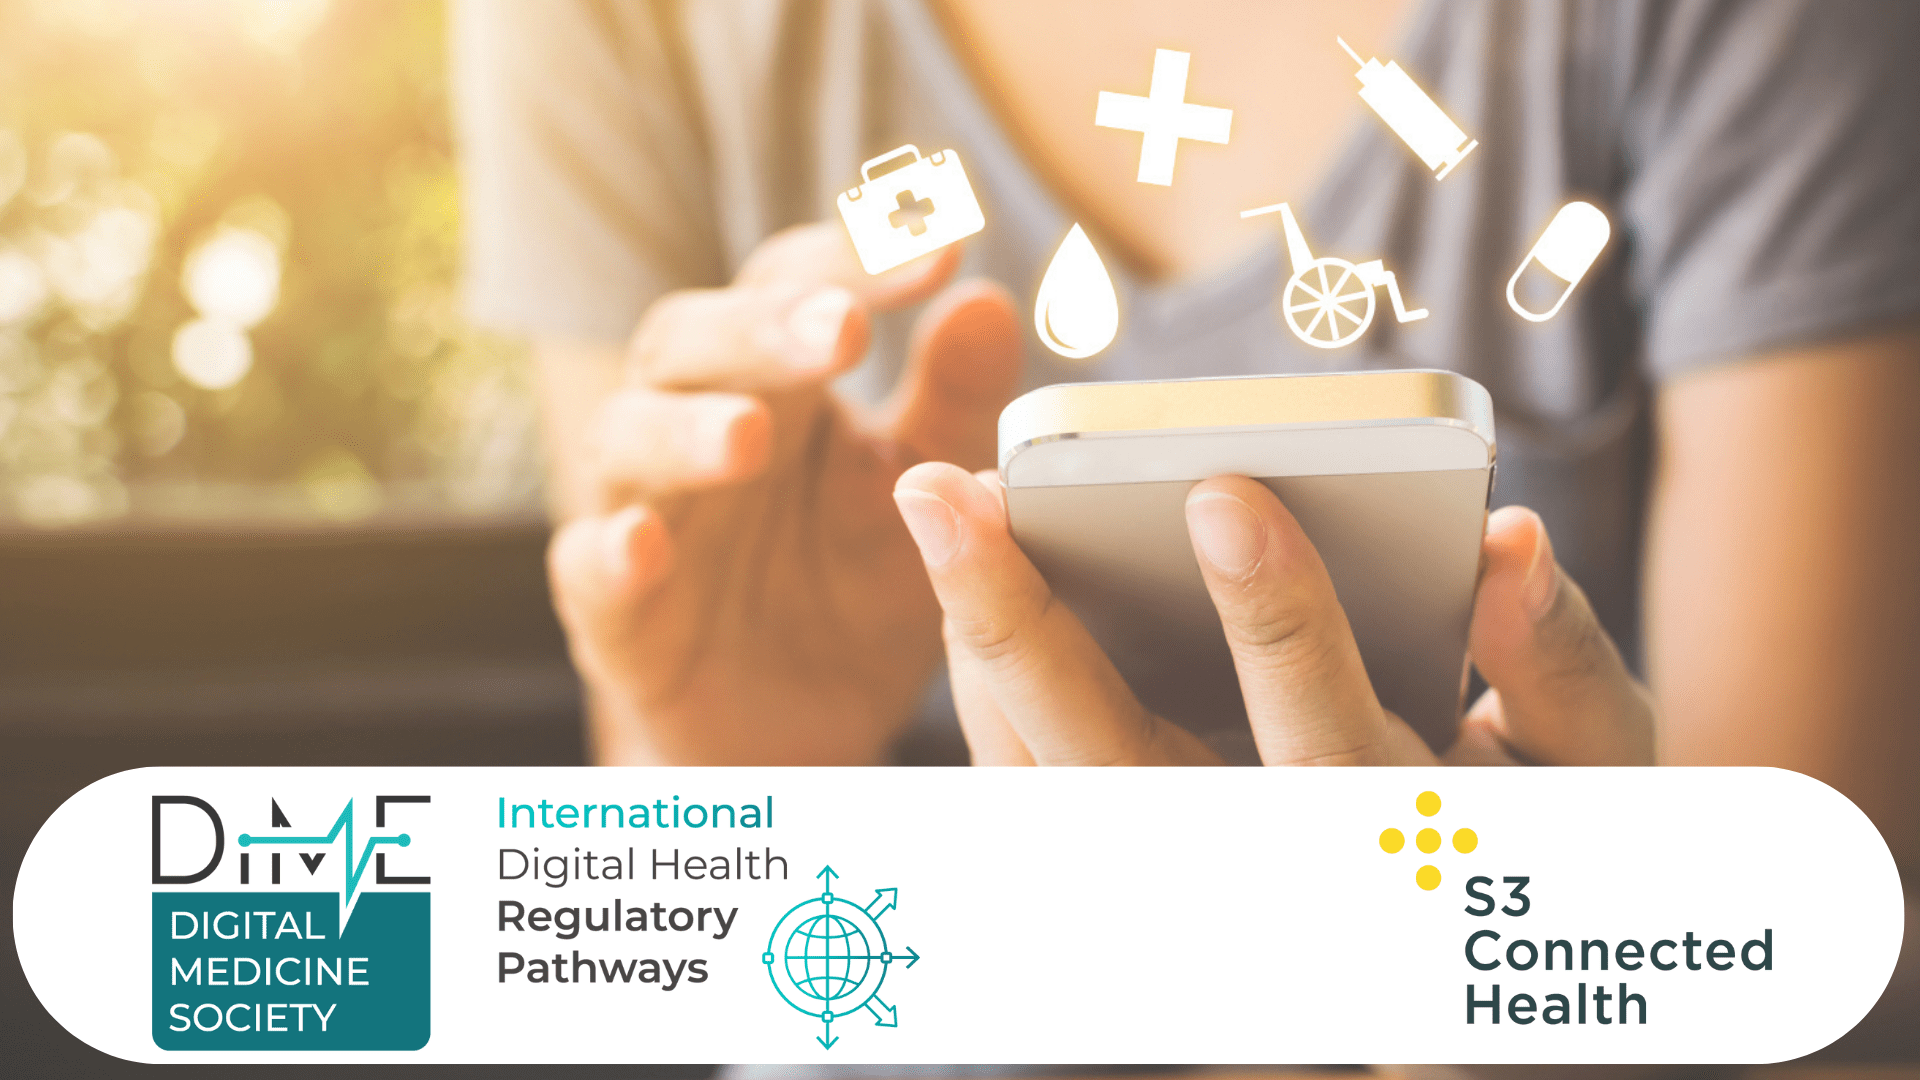 S3 Connected Health joins DiMe's team of digital health experts in their new project 'International Regulatory Pathways’